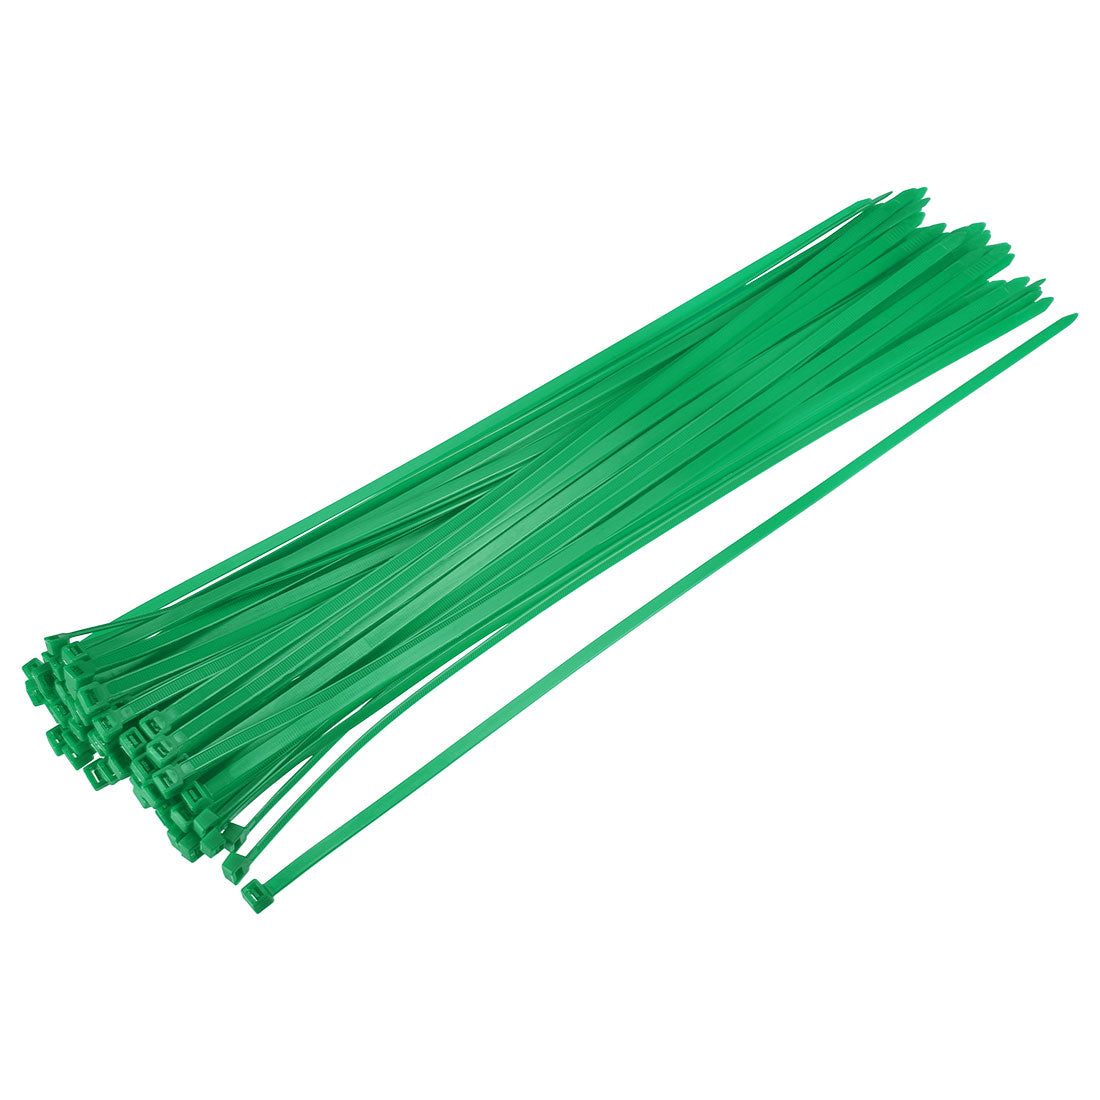 uxcell Uxcell Cable Zip Ties 300mmx3.6mm Self-Locking Nylon Tie Wraps Green 100pcs